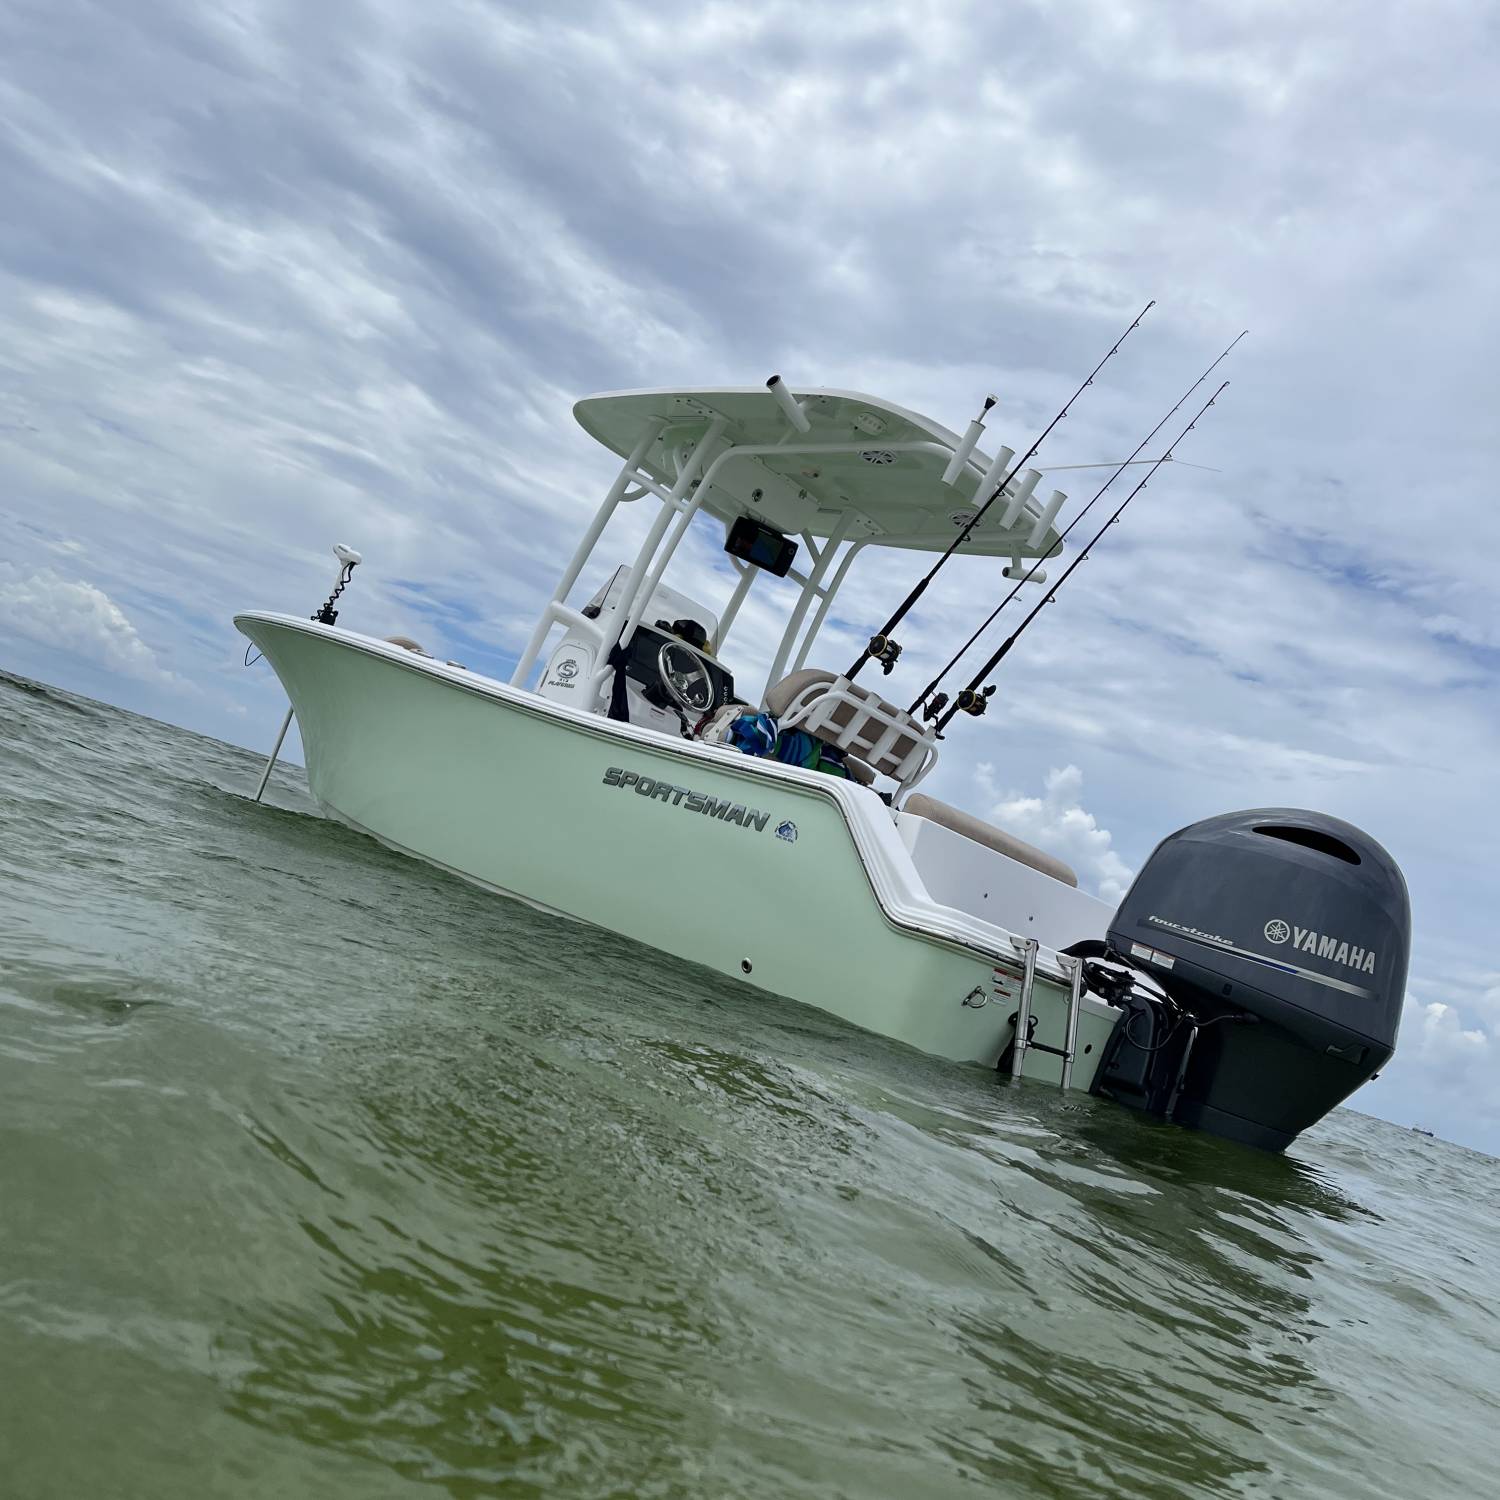 Title: 212 open - On board their Sportsman Open 212 Center Console - Location: PCB. Participating in the Photo Contest #SportsmanOctober